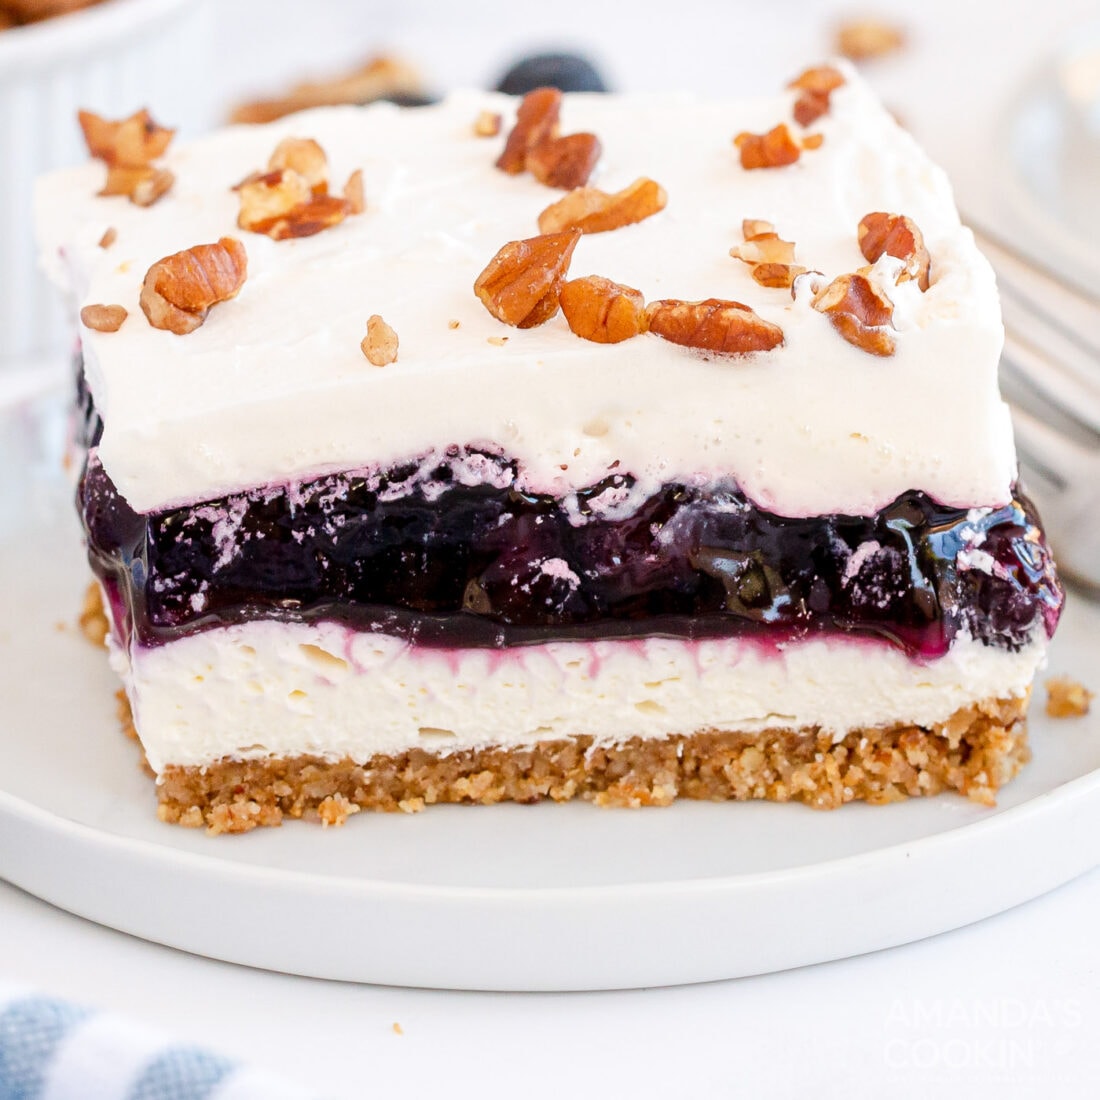 Blueberry Delight - Amanda's Cookin' - One Pan Desserts